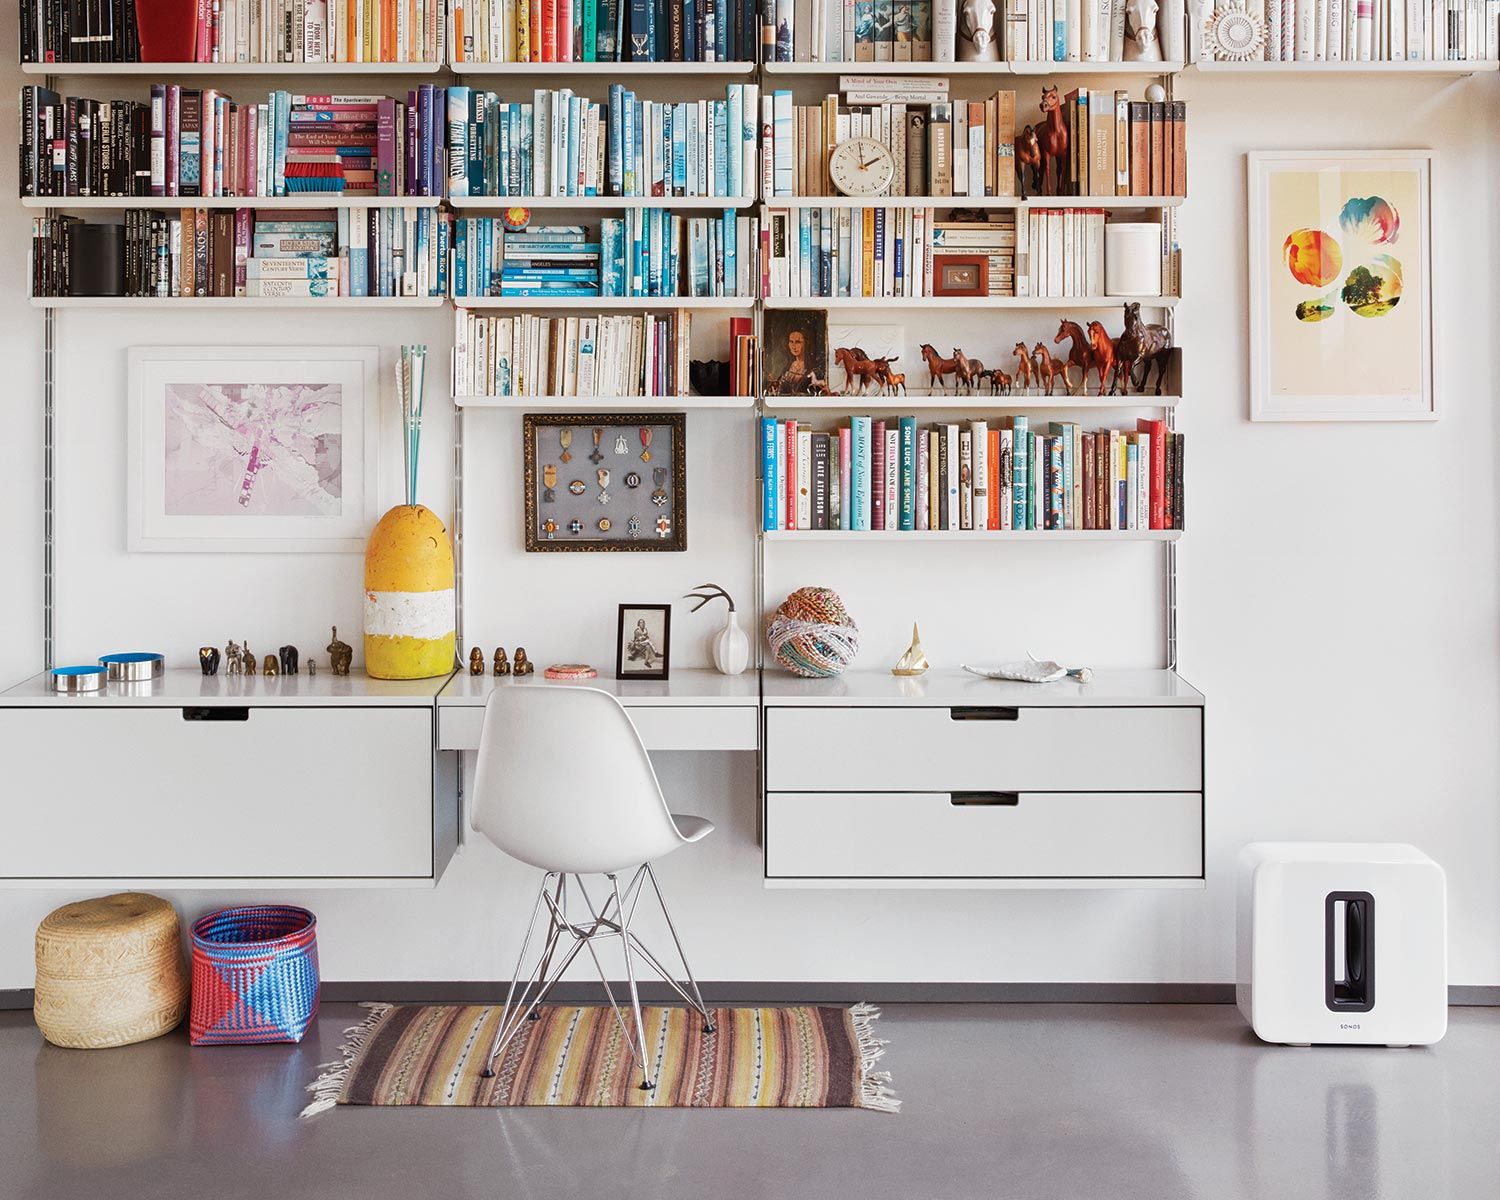 A modern home office with a bookshelf, a desk, and a white Sonos Sub speaker.